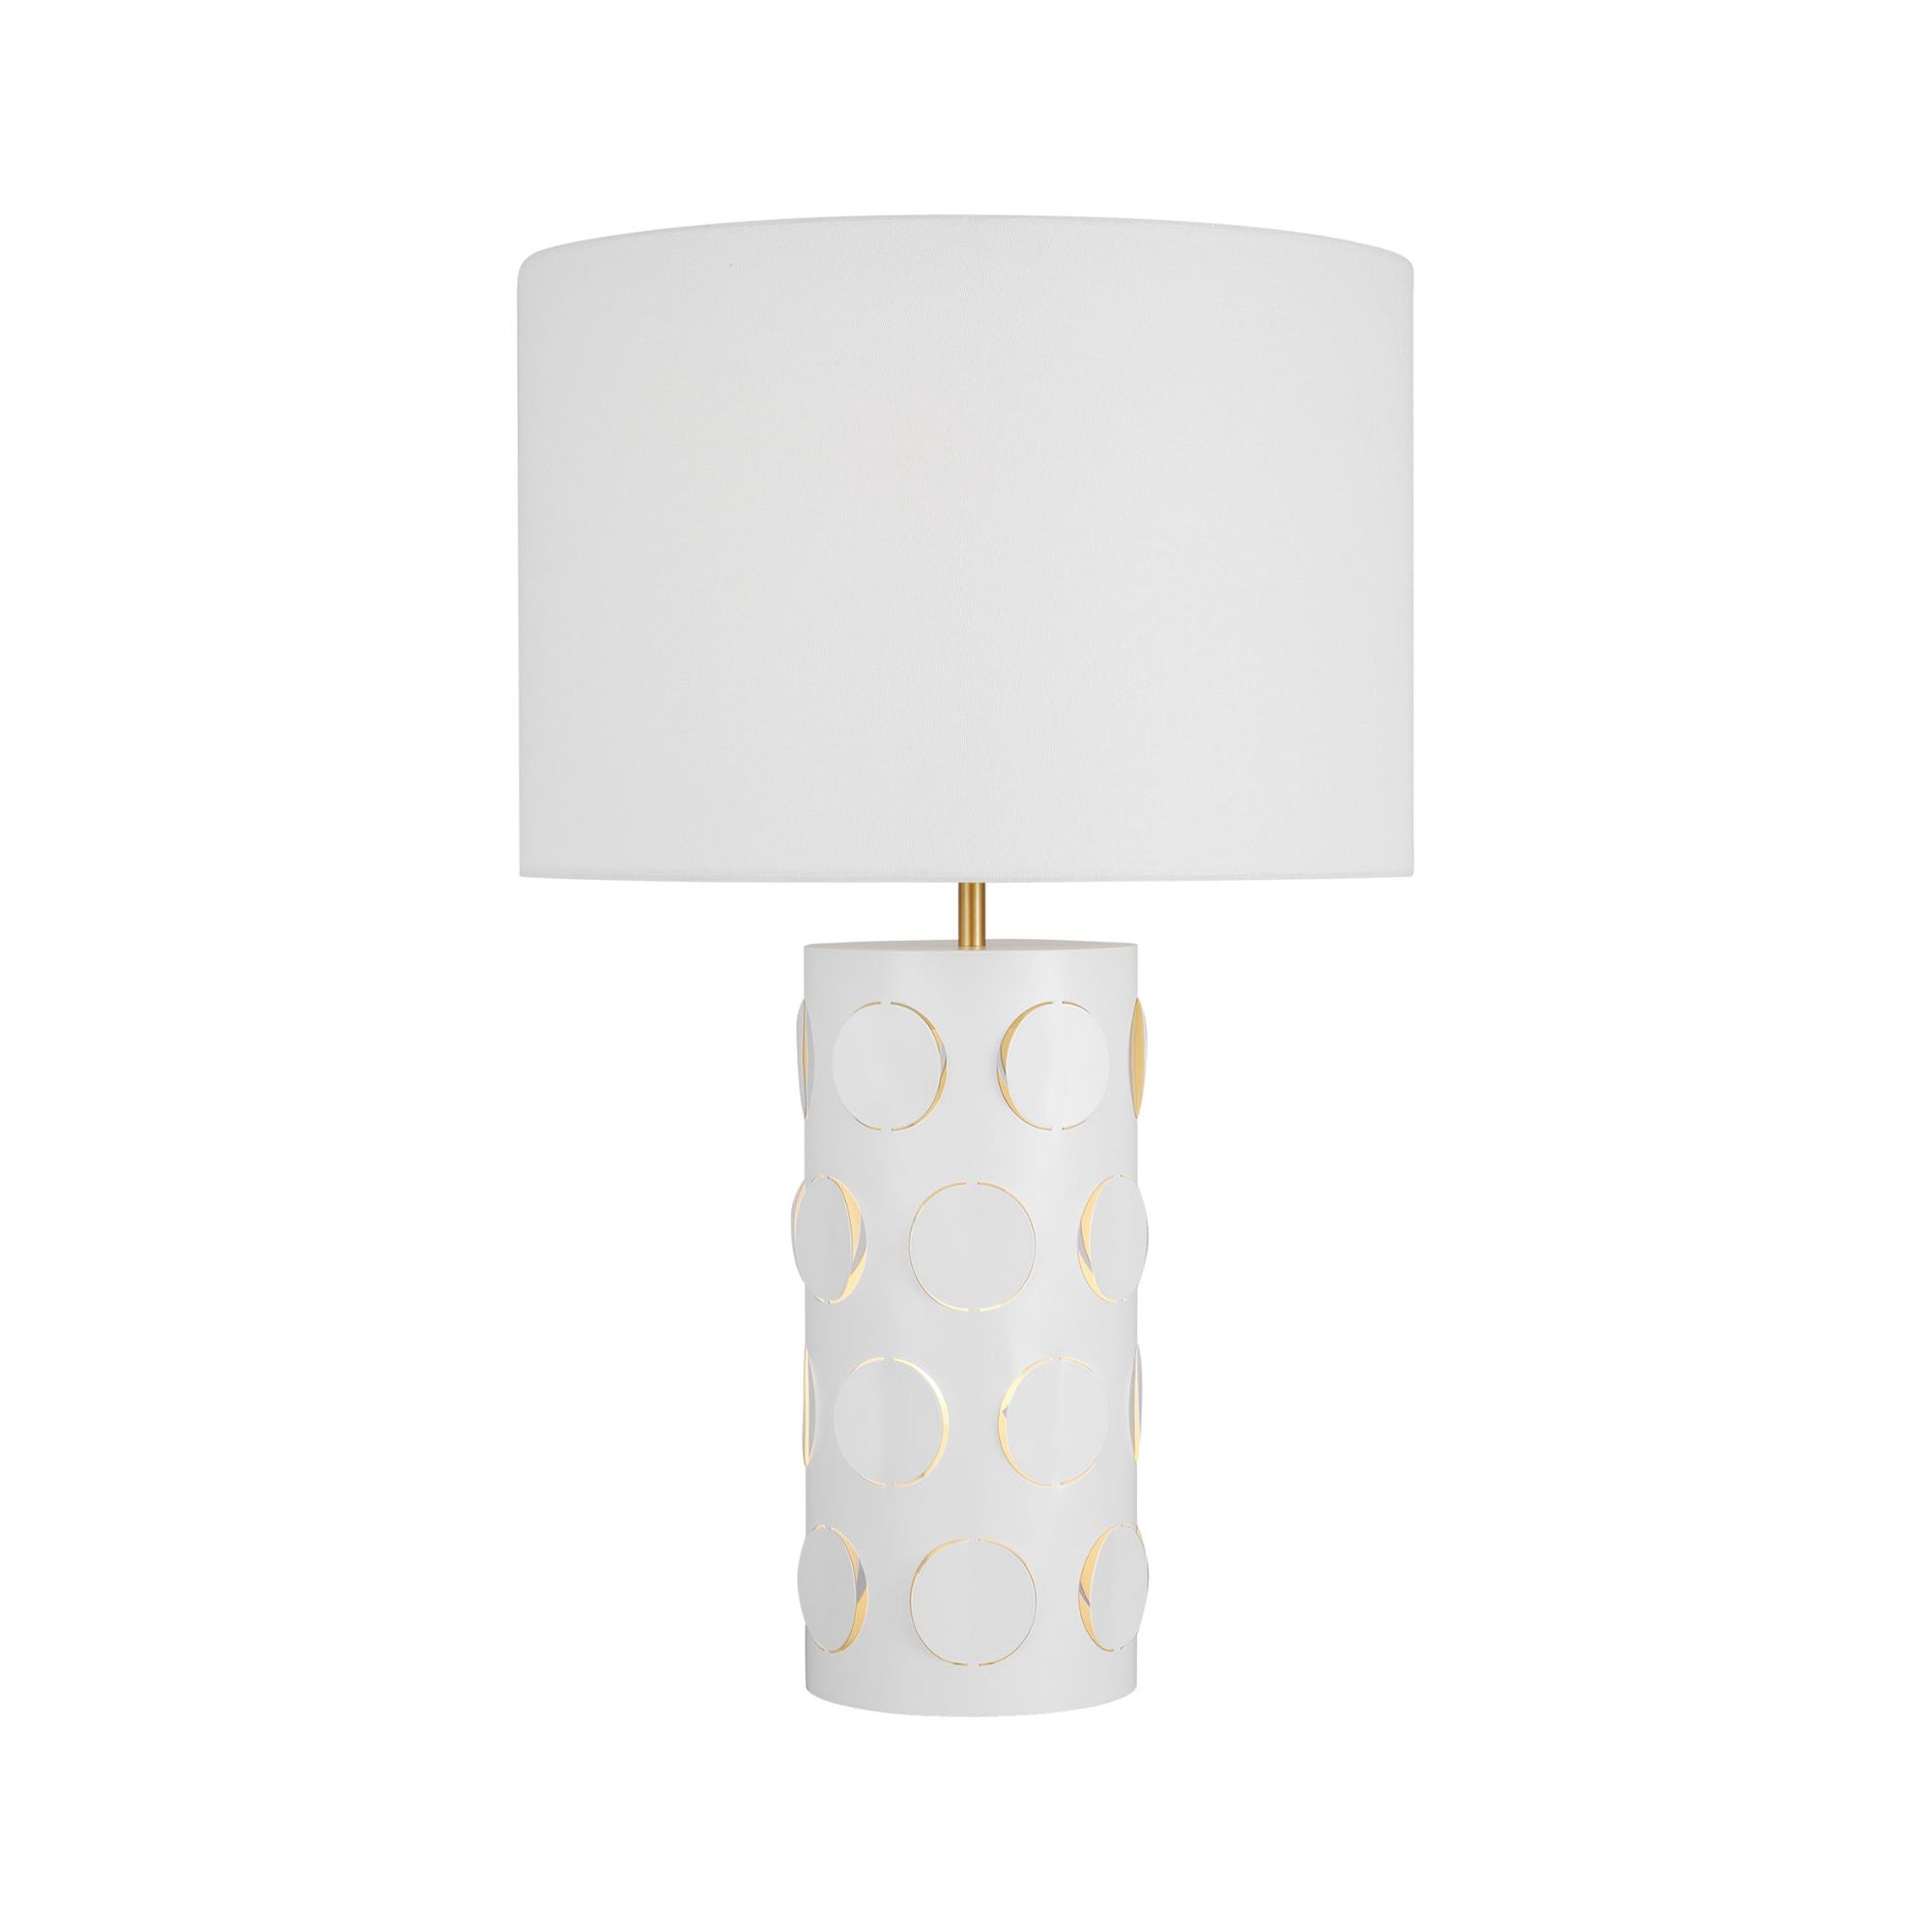 kate spade new york Dottie Table Lamp in Burnished Brass